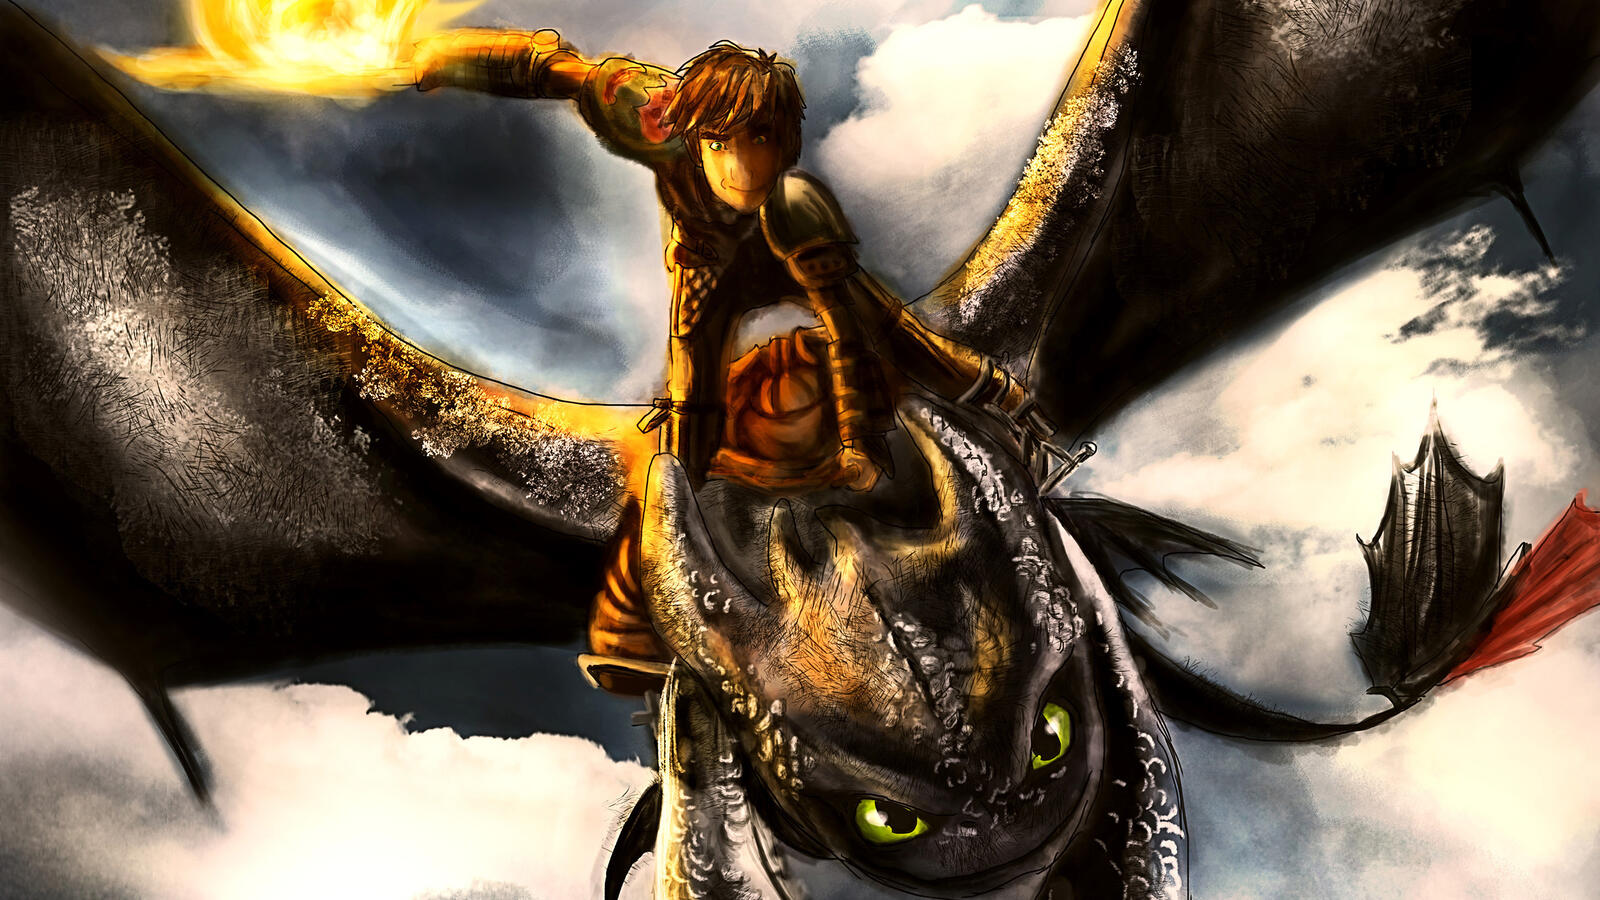 Wallpapers night fury how to train your dragon digital art on the desktop